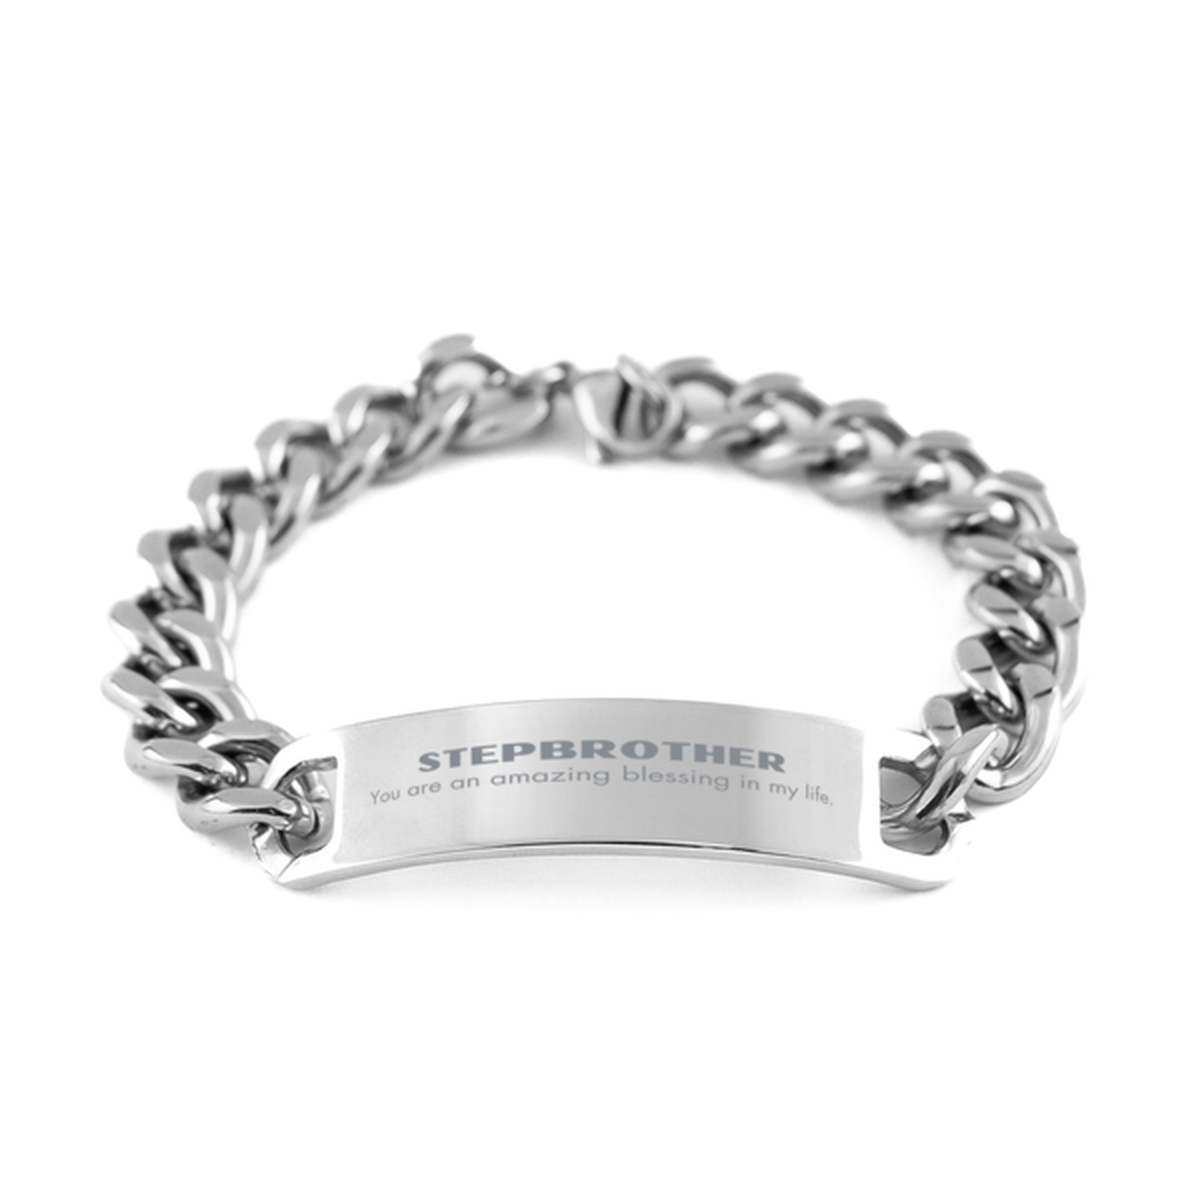 Stepbrother Cuban Chain Stainless Steel Bracelet, You are an amazing blessing in my life, Thank You Gifts For Stepbrother, Inspirational Birthday Christmas Unique Gifts For Stepbrother